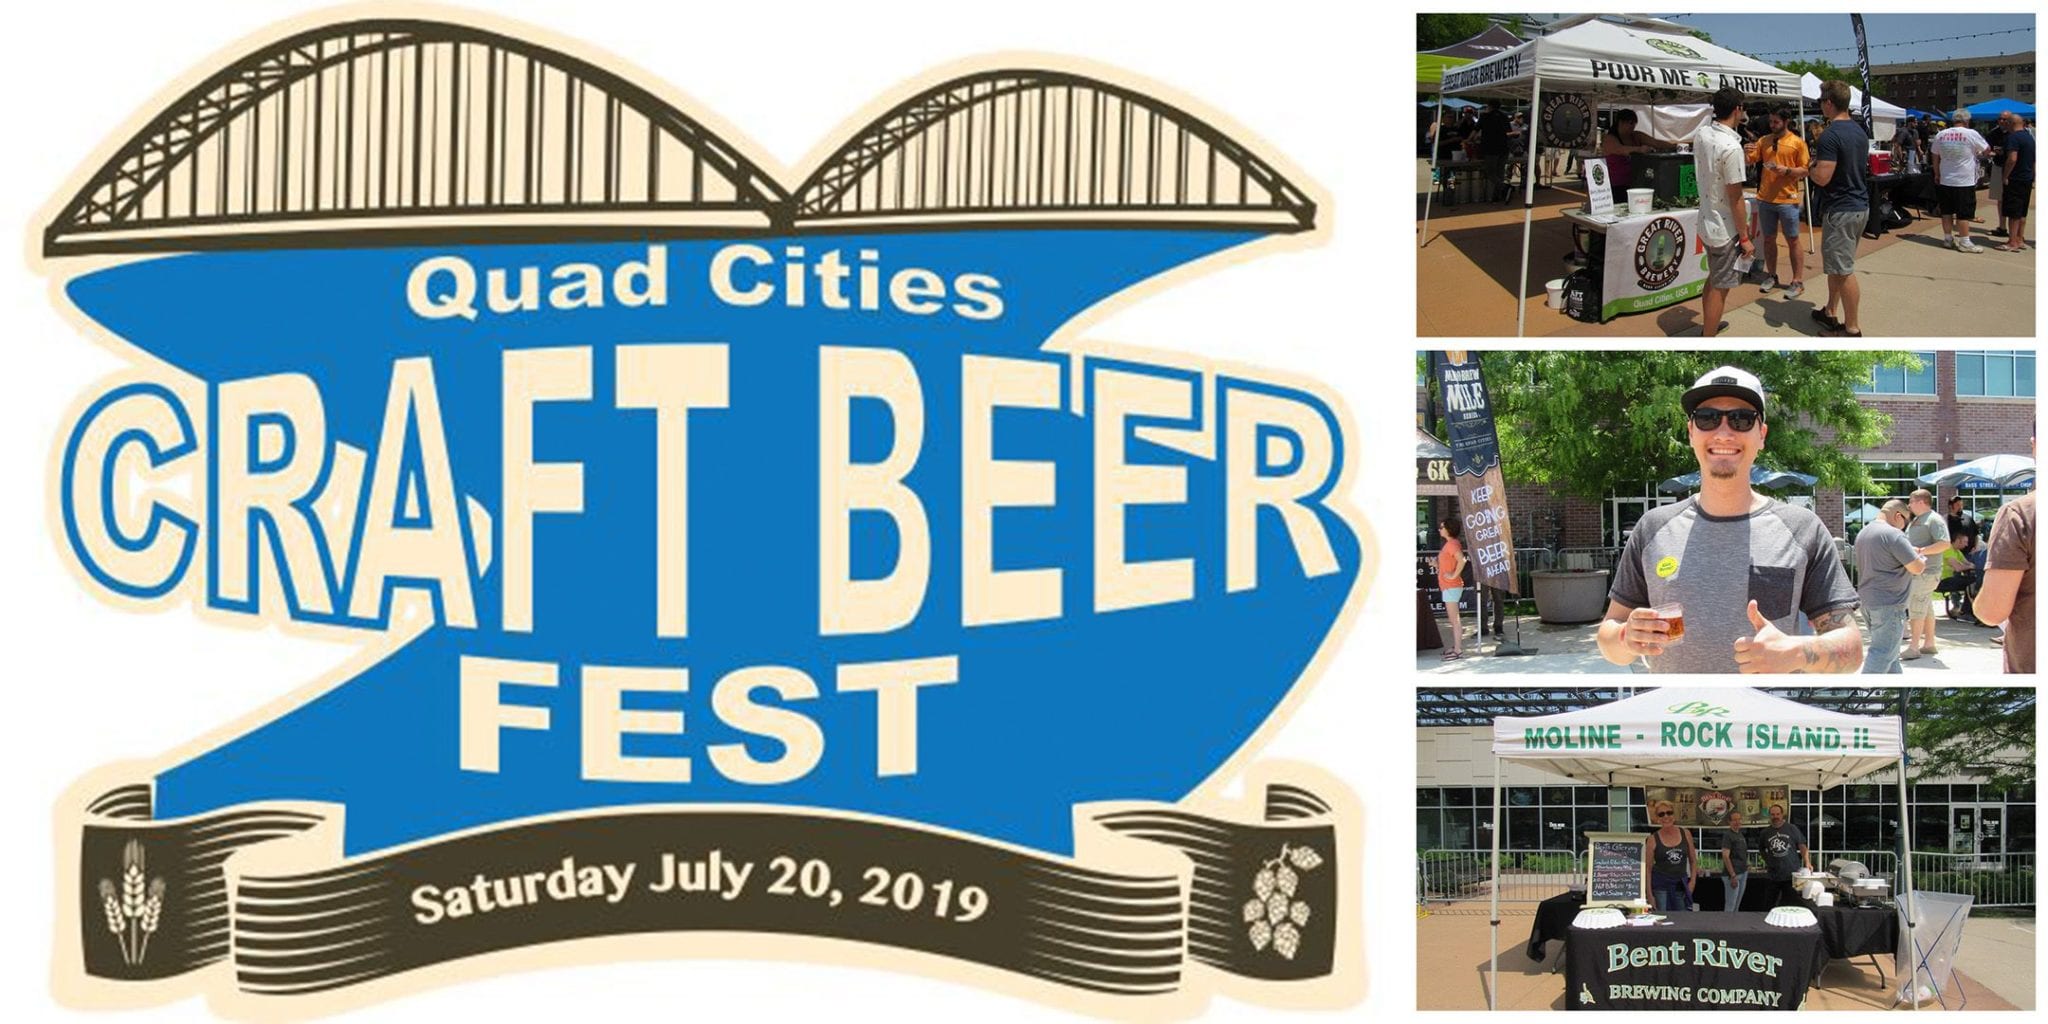 Get Your Drink on At Quad Cities Craft Beer Fest! Quad Cities